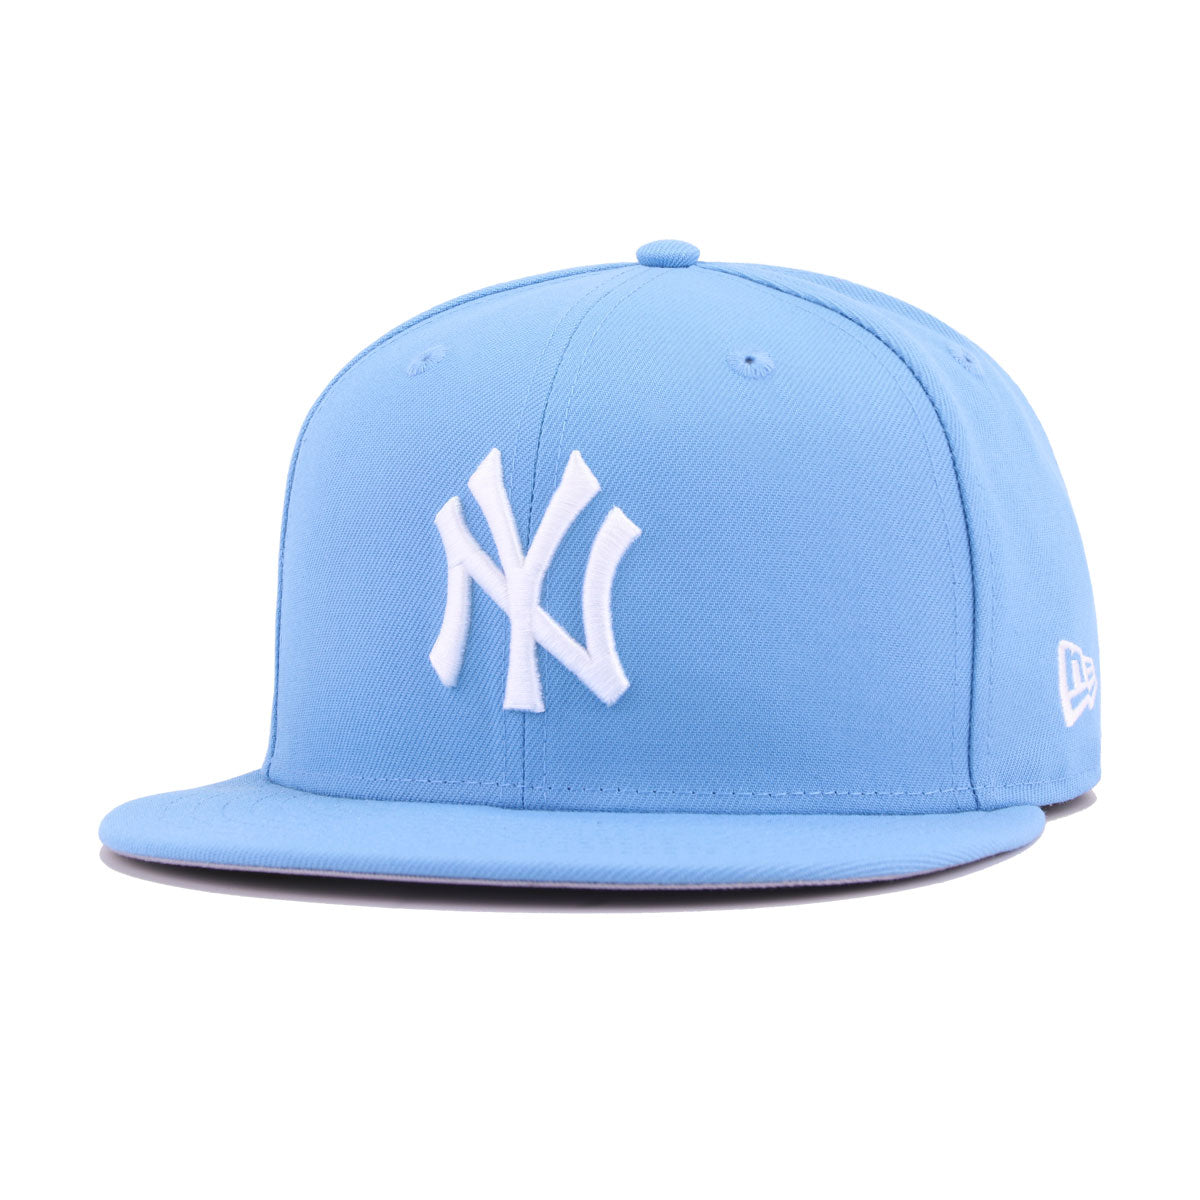 New York Yankees New Era 59FIFTY Fitted Cap HAT 5950 BABY SKY